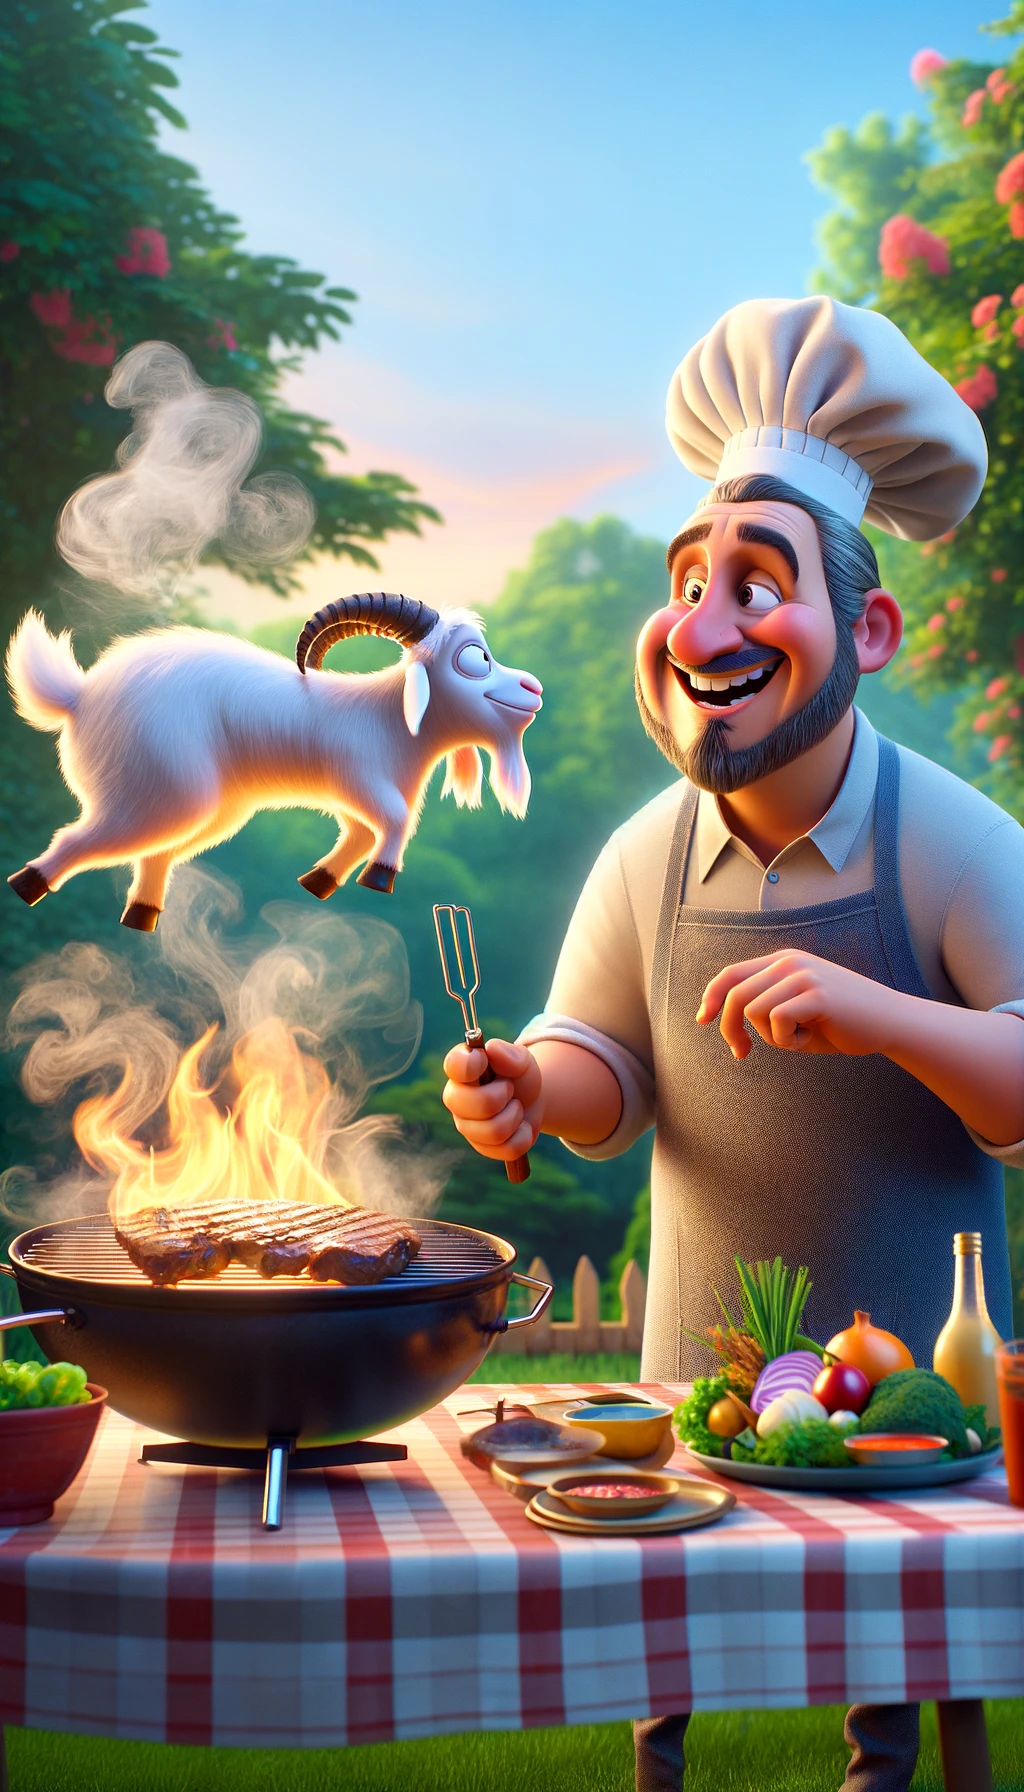 A Pixar-style movie poster featuring a man engaged in a delightful barbecue scene, grilling goat meat. The man has a friendly and skilled chef's appearance with a big smile, wearing an apron and a chef's hat. The grill is whimsically designed, emitting puffs of smoke that form playful shapes. The setting is an idyllic backyard with animated trees and a table set with vibrant dishes and sauces, ready for a feast.